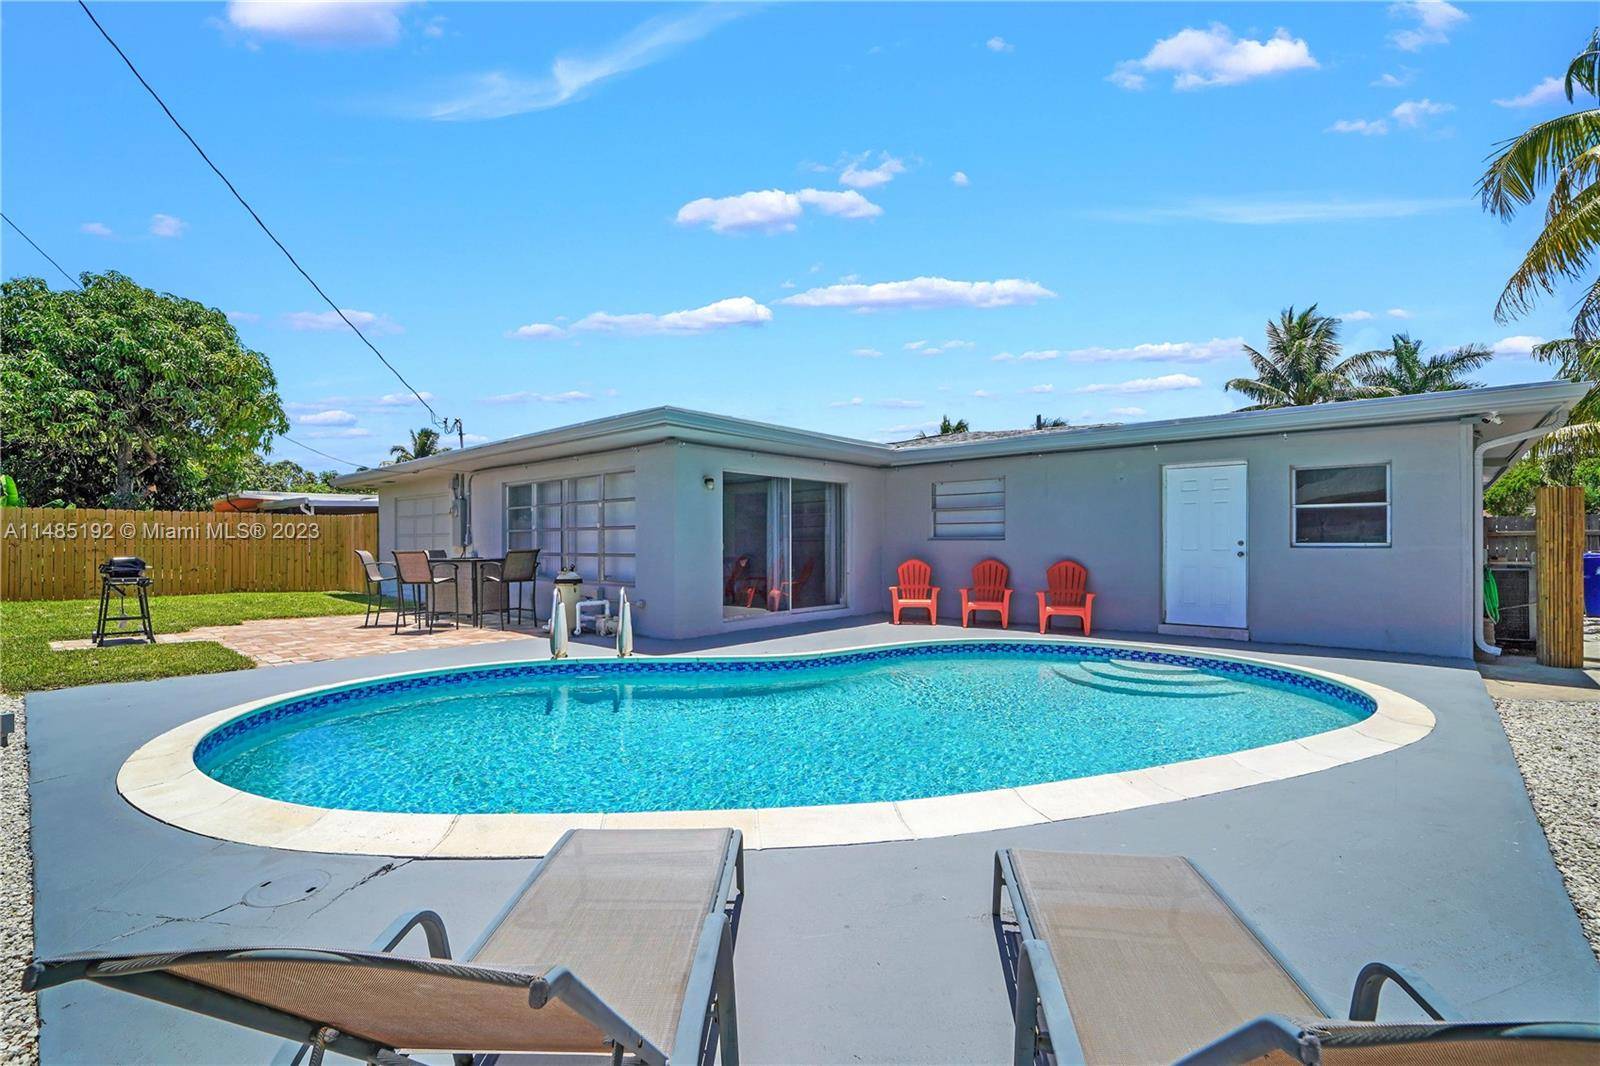 READY TO MOVE IN ! Stunning 3 bedroom 2 bath single family FULLY furnished home with a pool.